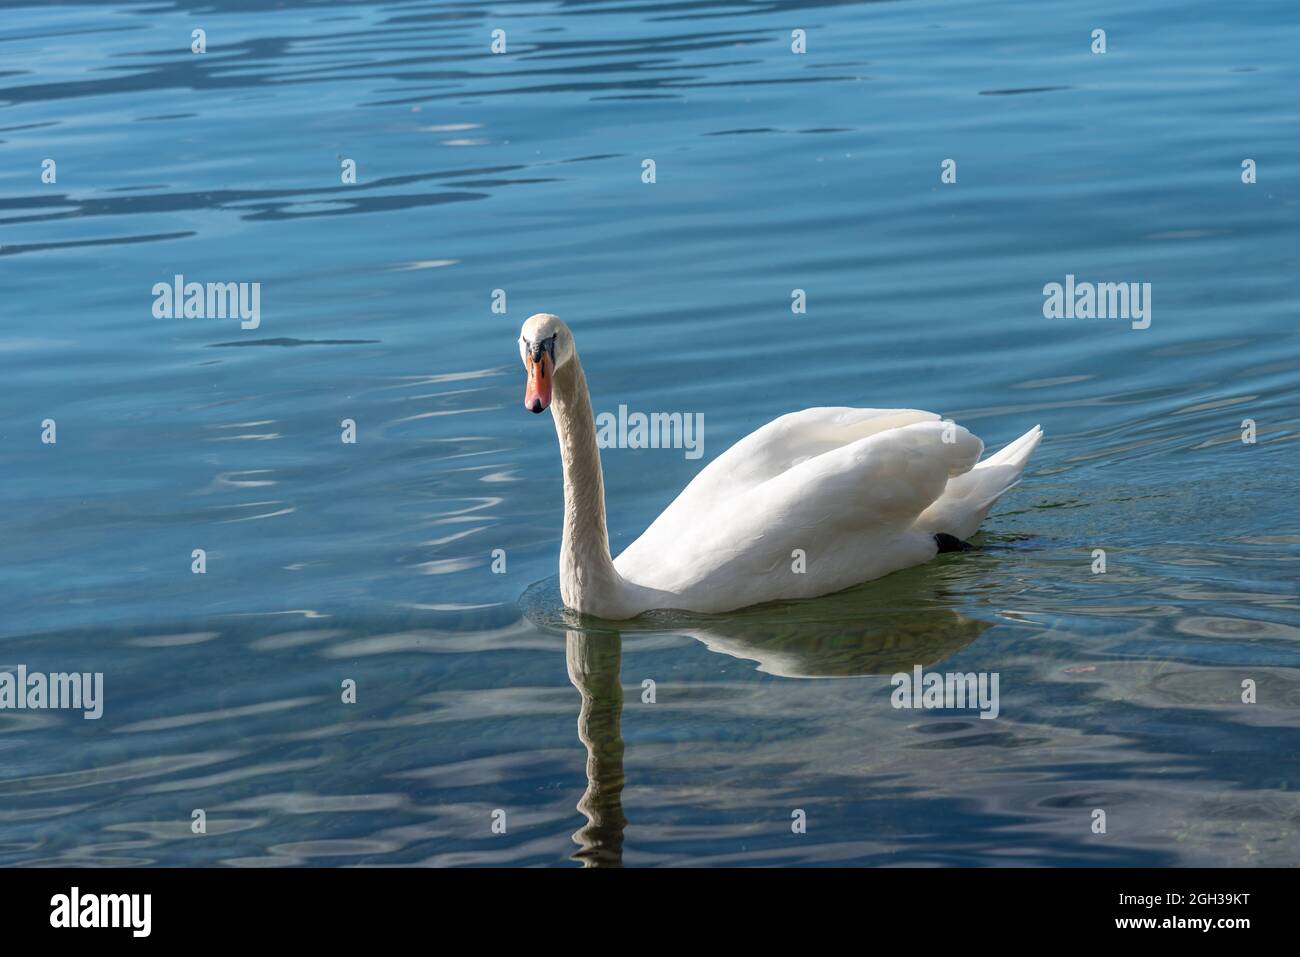 White swan floating in a crystal clear lake with its image reflected in the water on a sunny day. Stock Photo